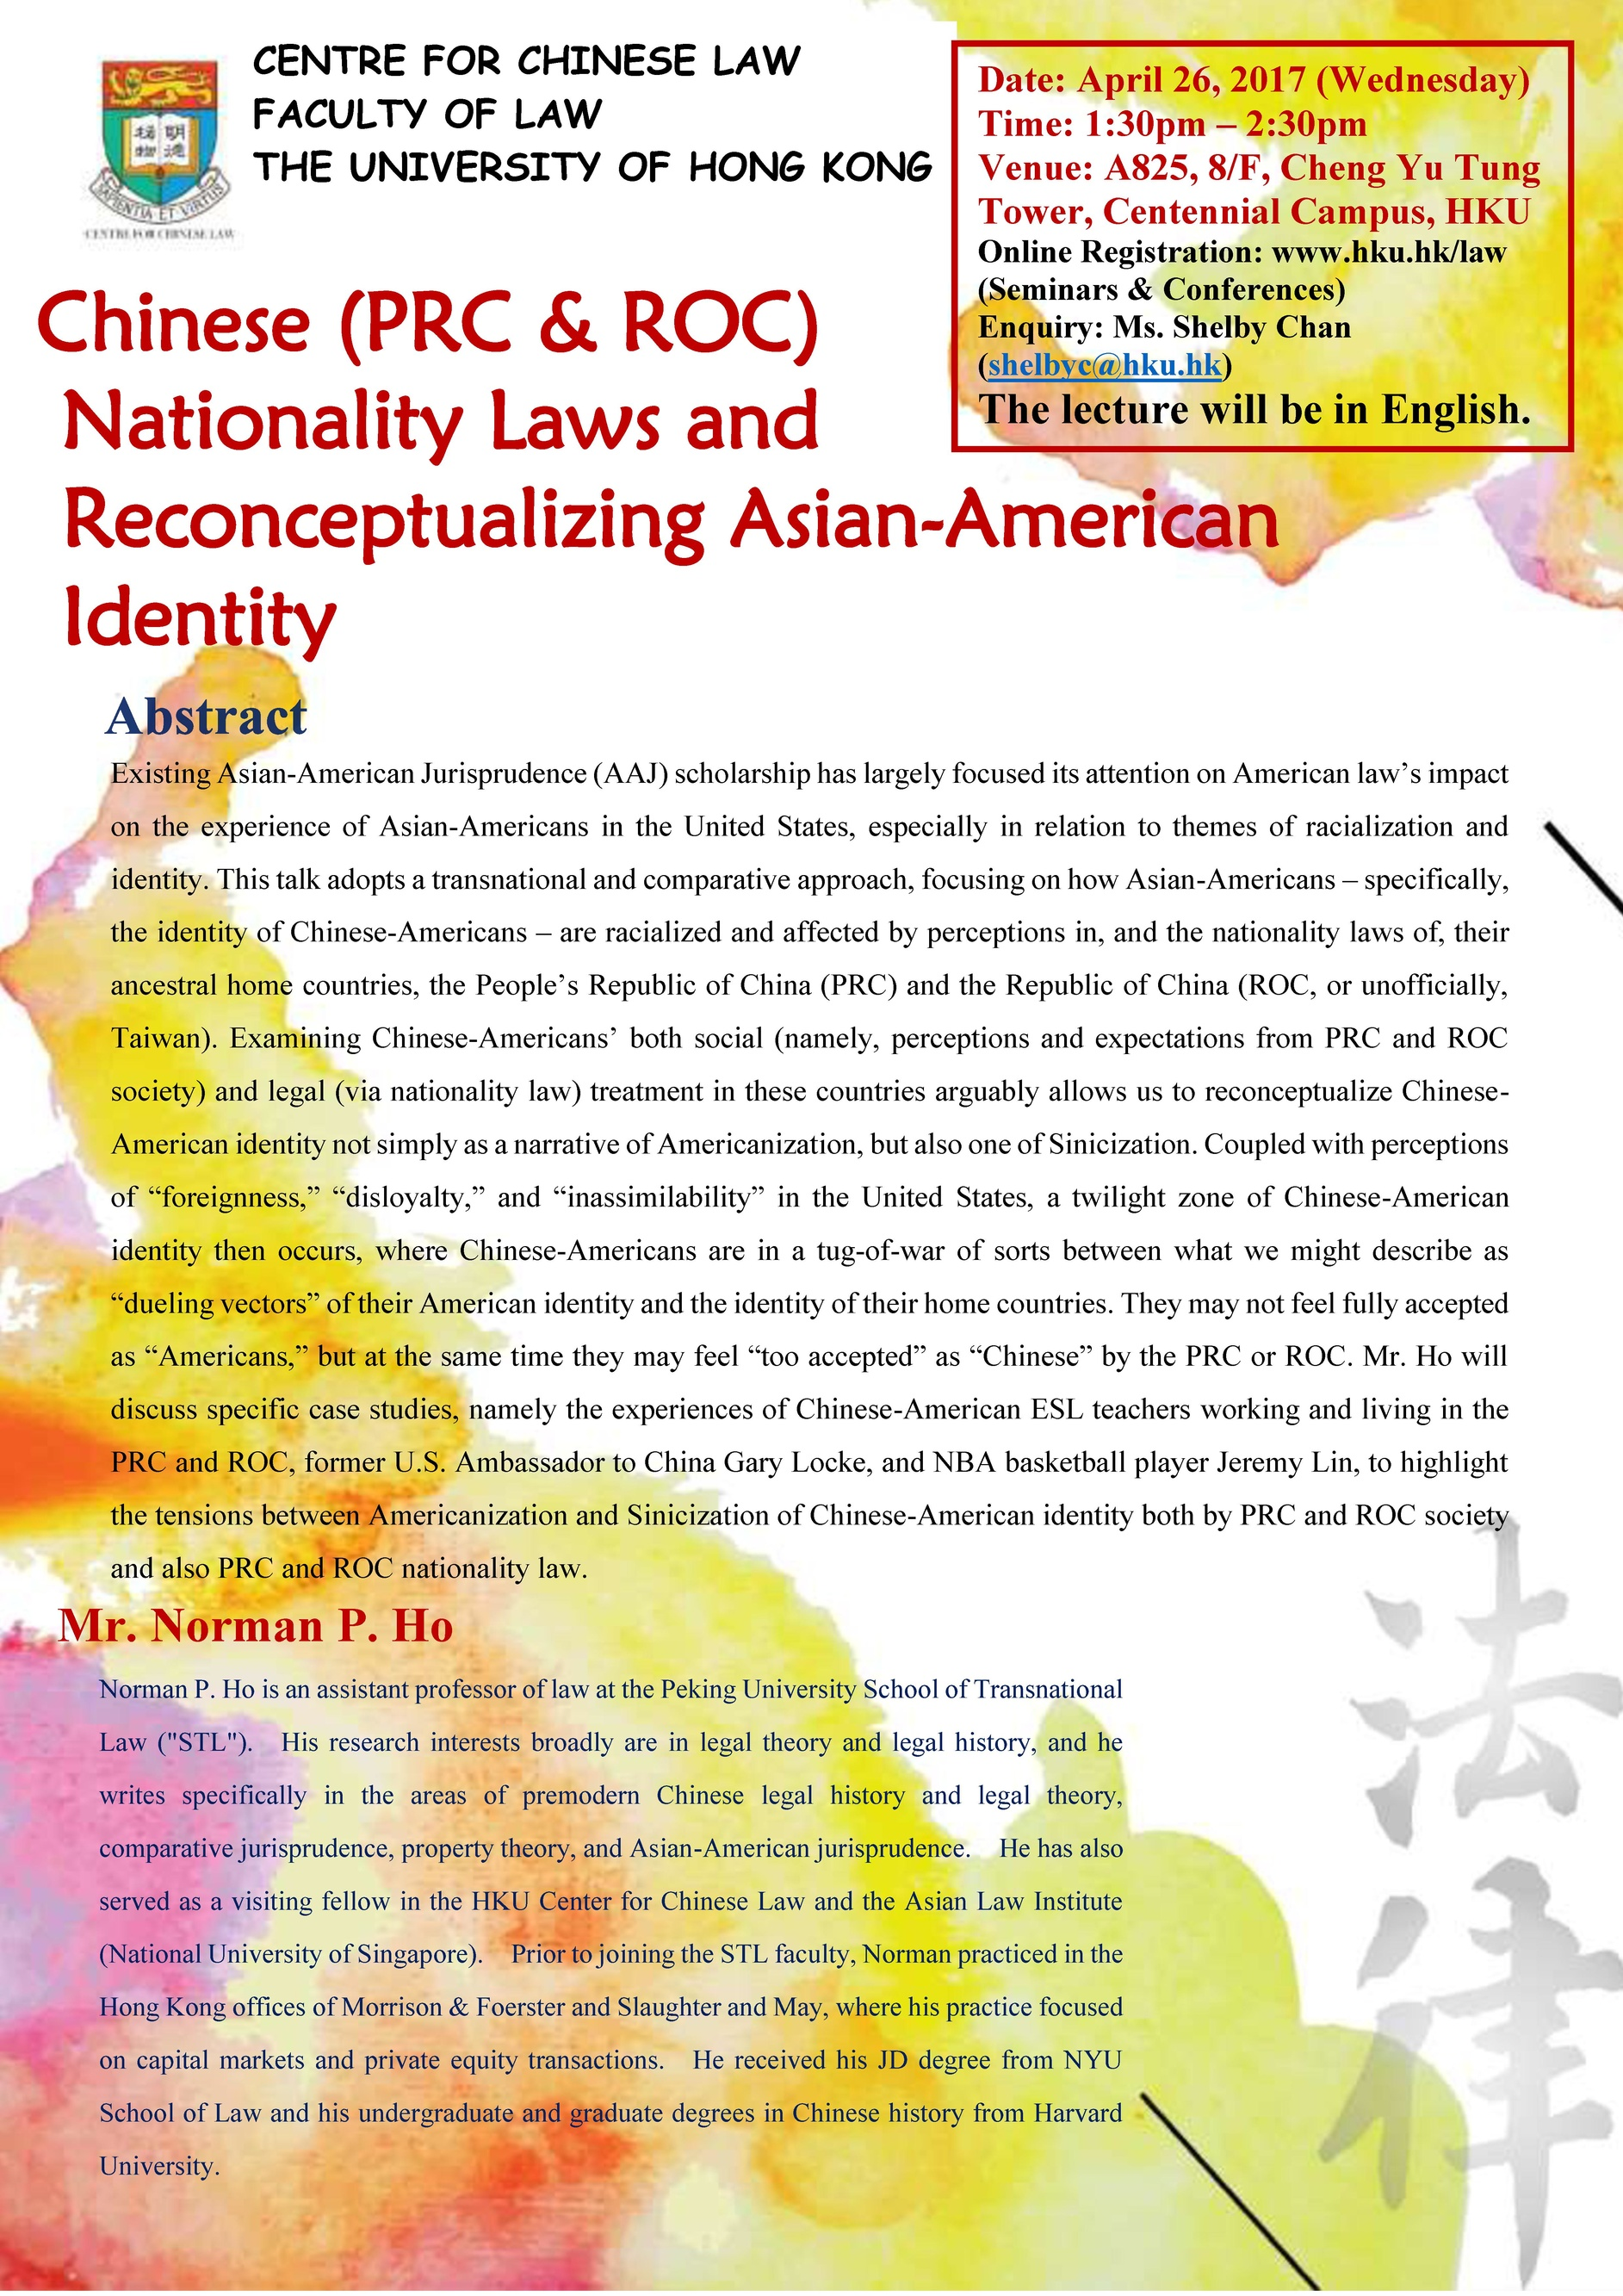 Chinese (PRC & ROC) Nationality Laws and Reconceptualizing Asian-American Identity